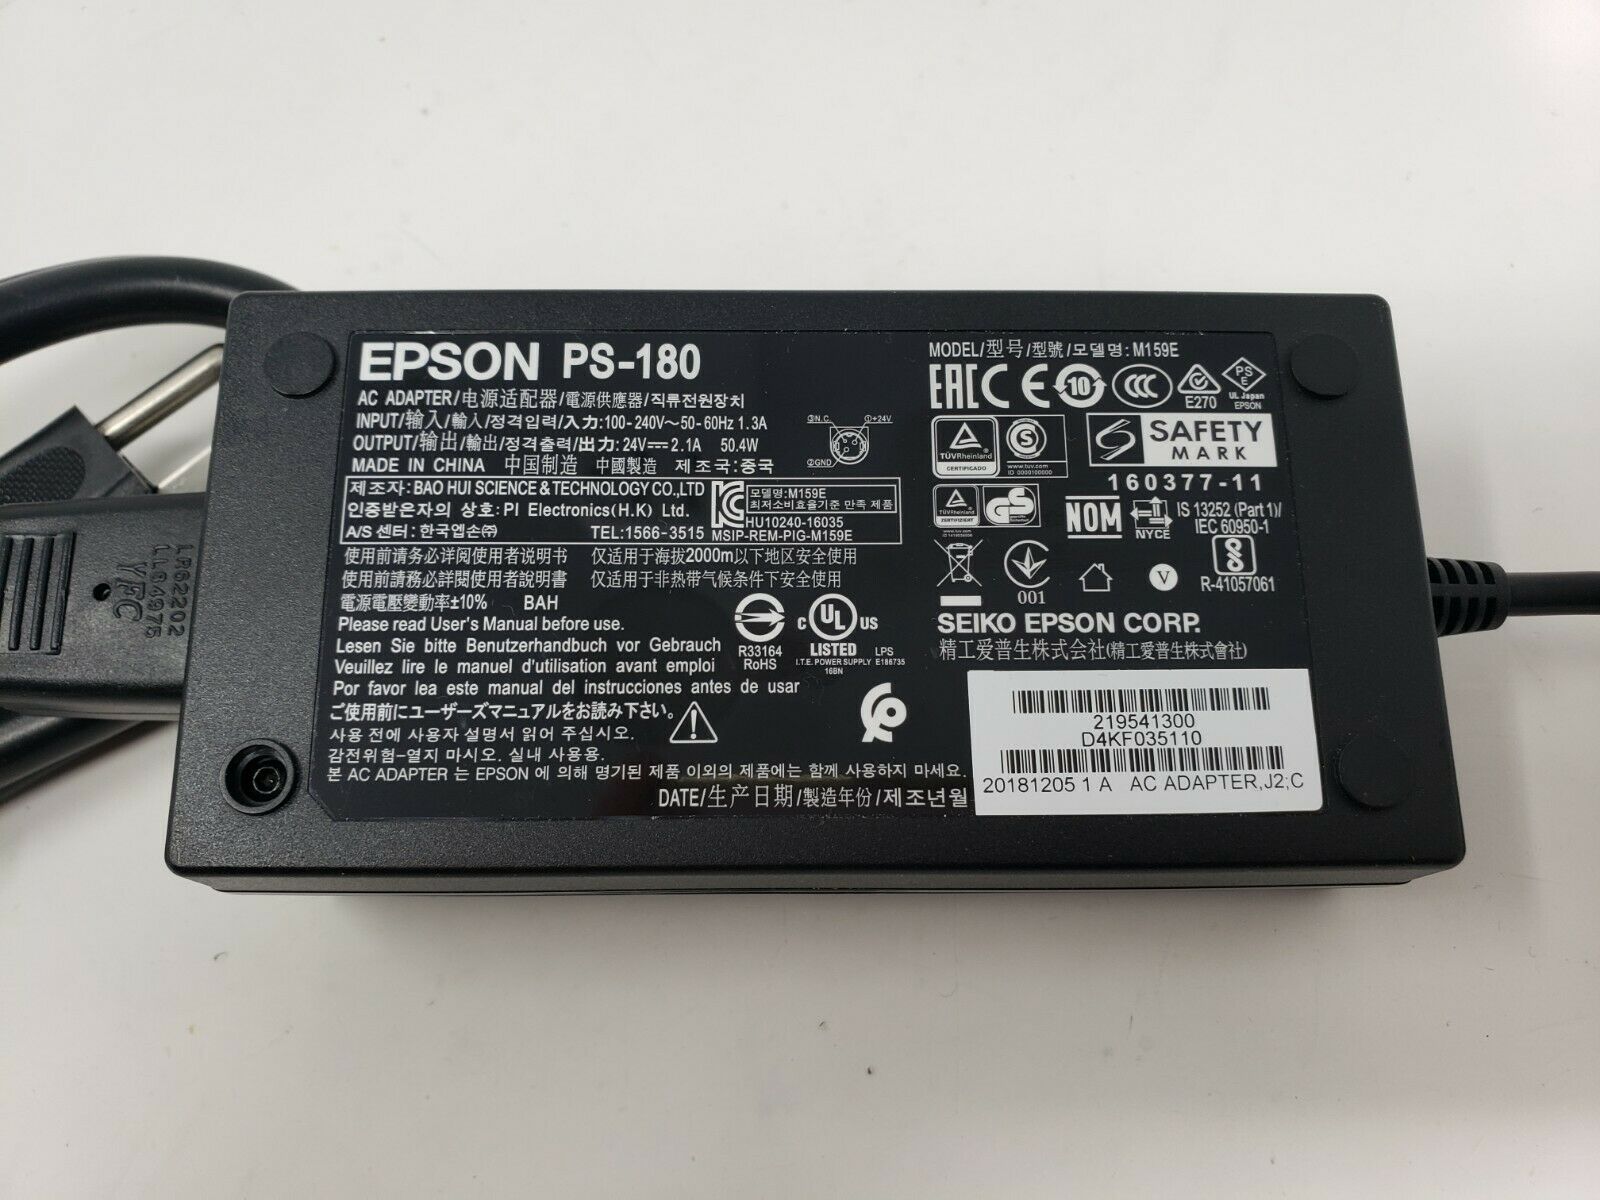 Genuine Epson PS-180 AC Adapter M159B 24V 2.1A Excellent Condition Compatible Brand: For Epson Type: Power Supply Co